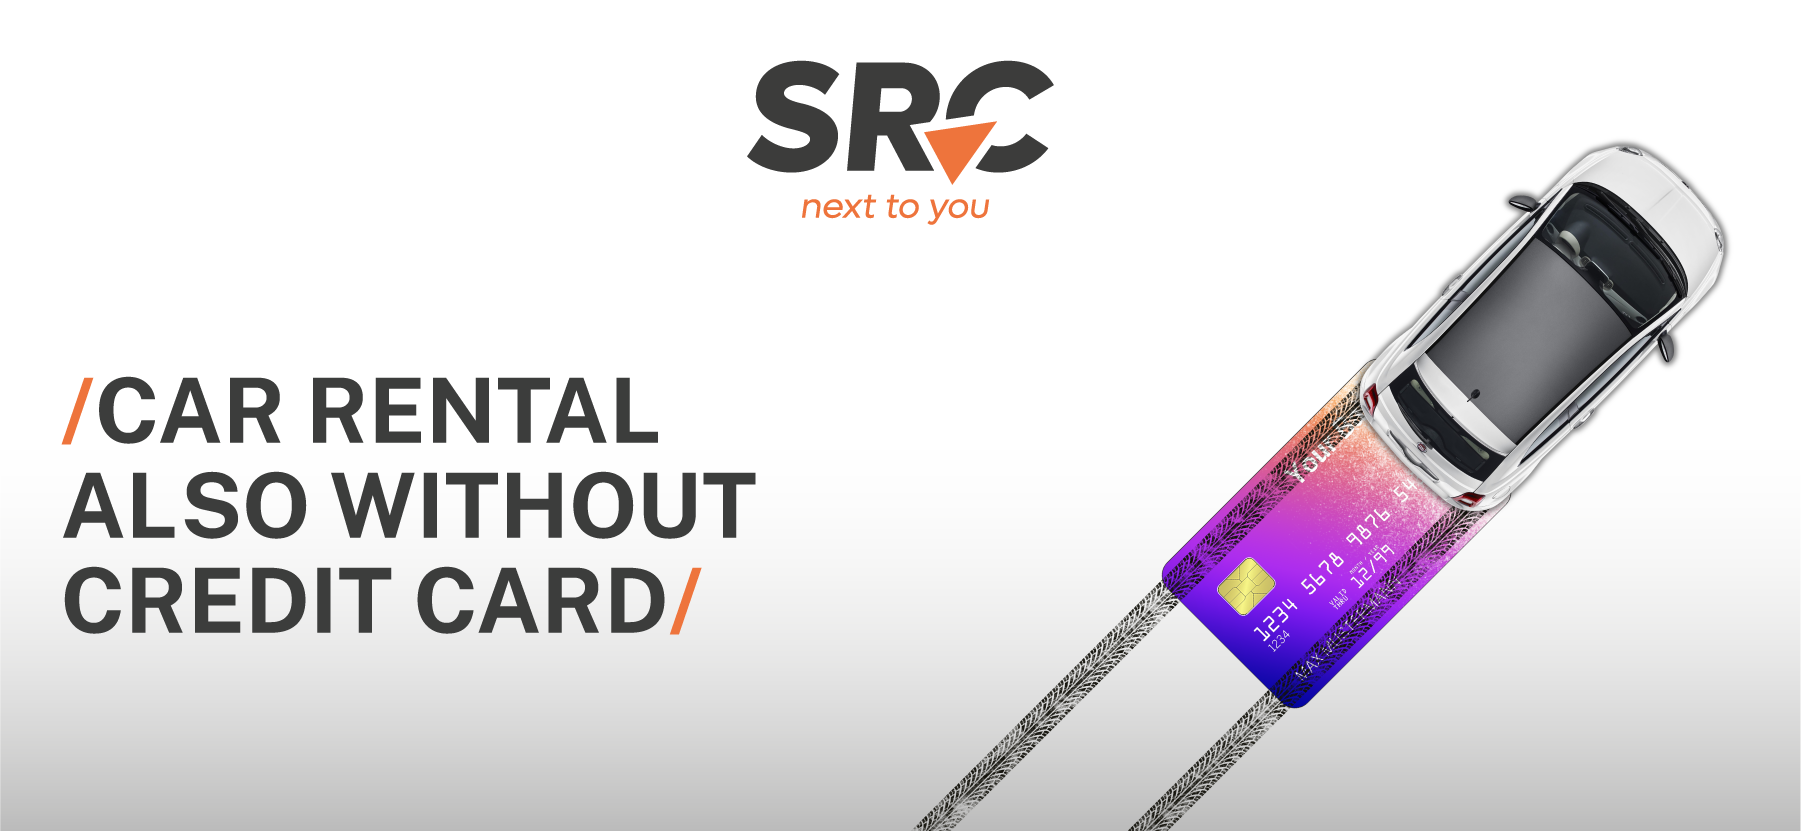 SRC_Car rental also without credit card